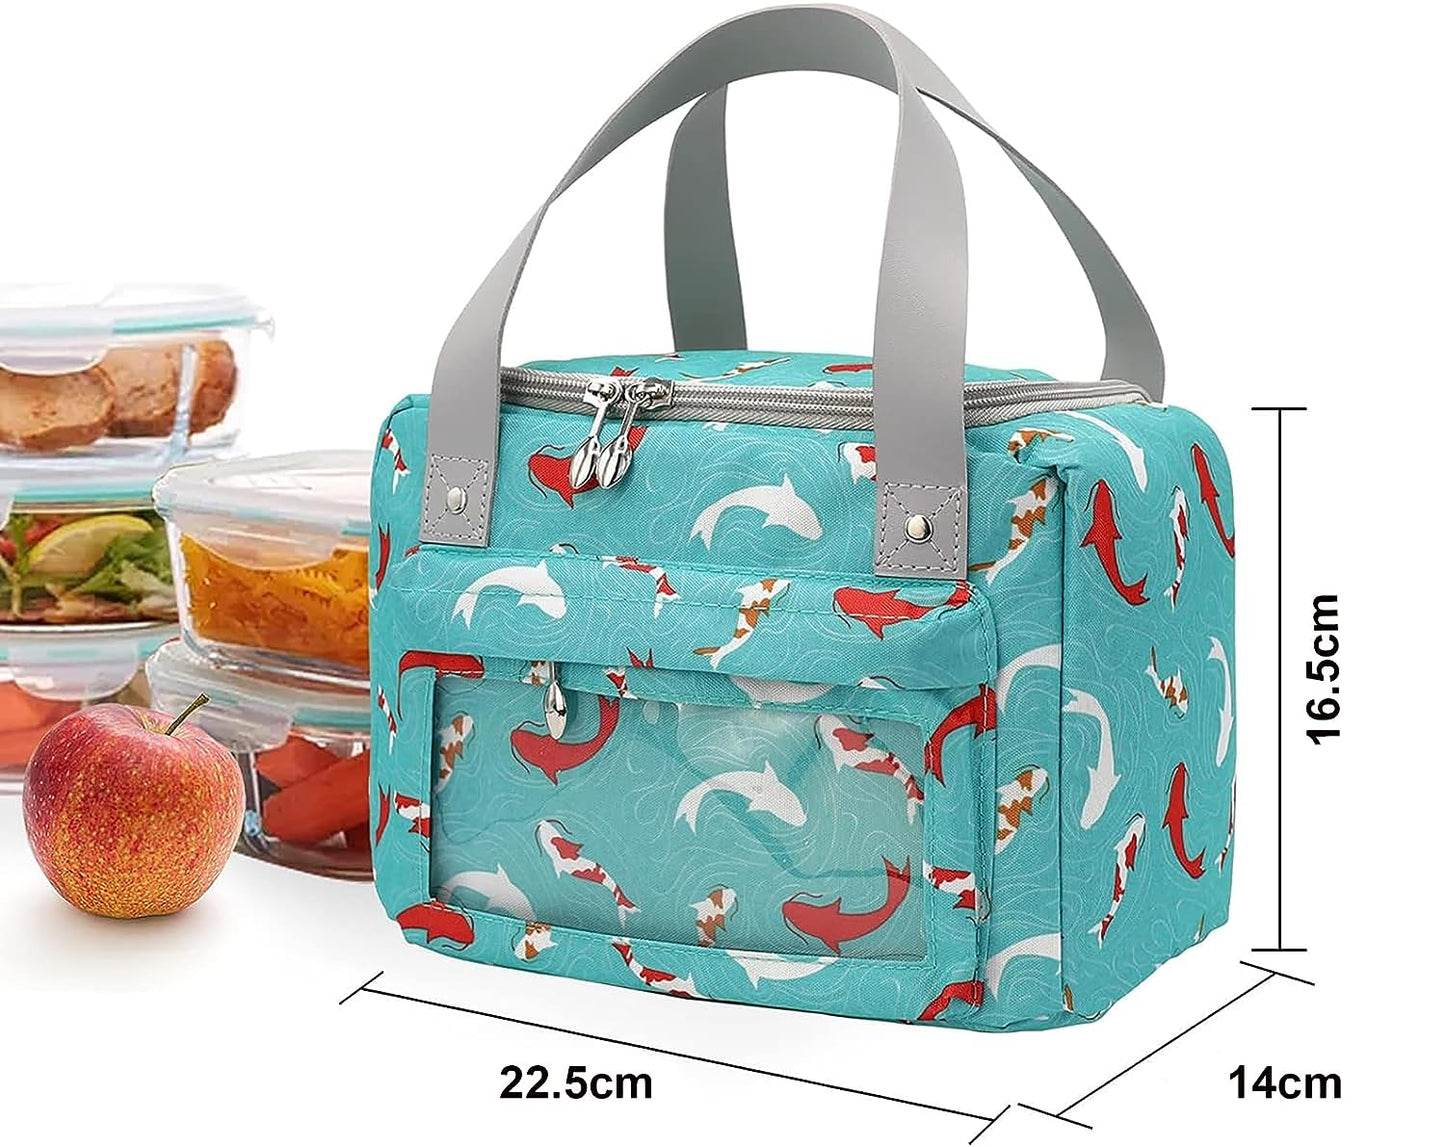 Printed Insulated Lunch Bags